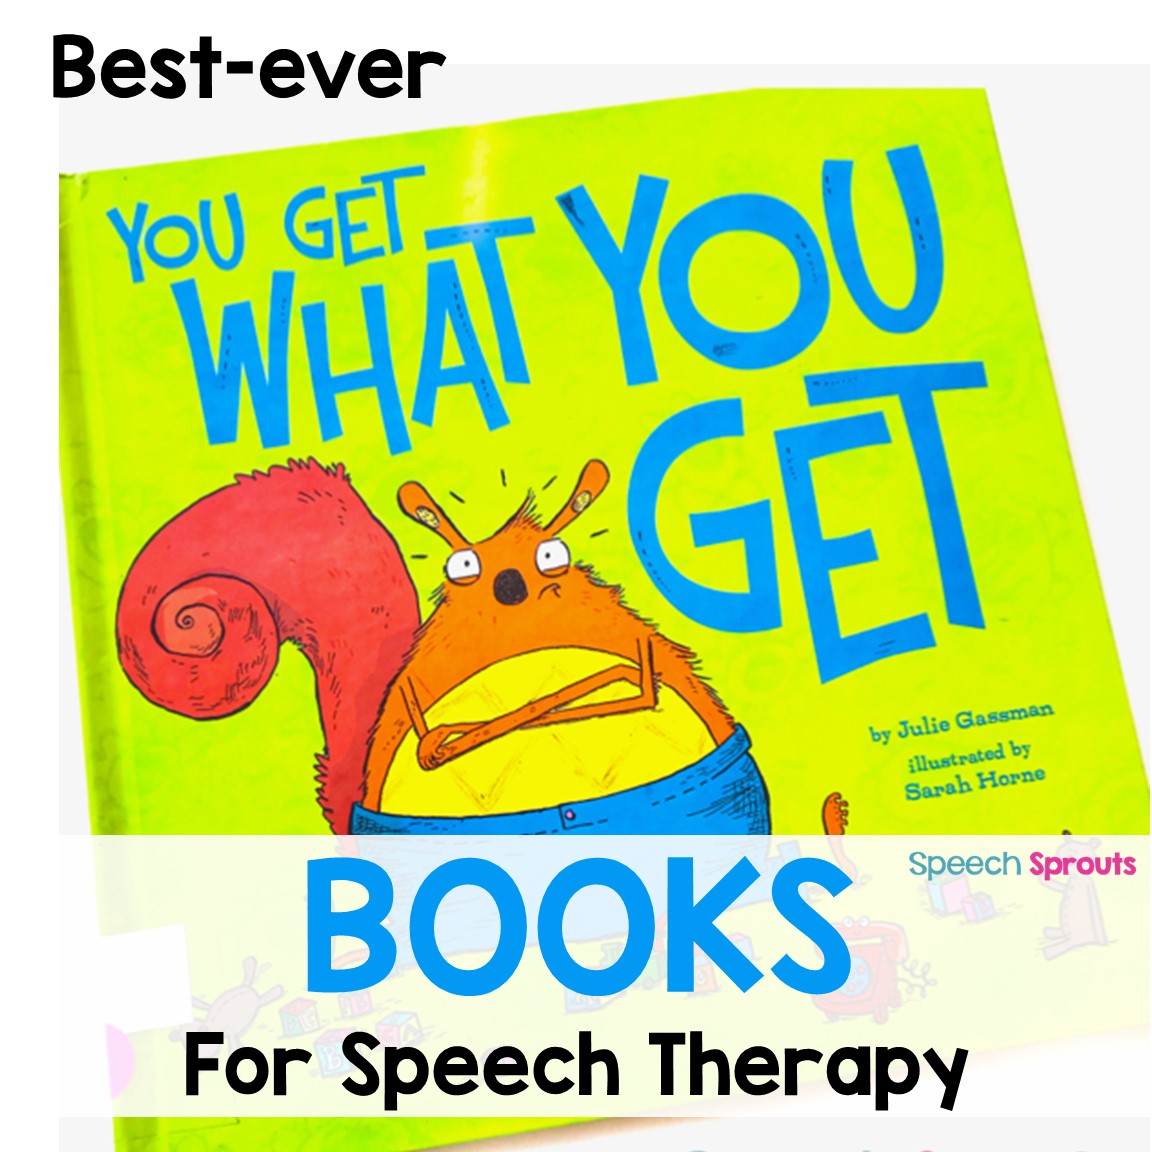 You Get What You Get Books for Speech Therapy. The cover showls a Young squirrel who is pouting and mad because he didn't get his way!